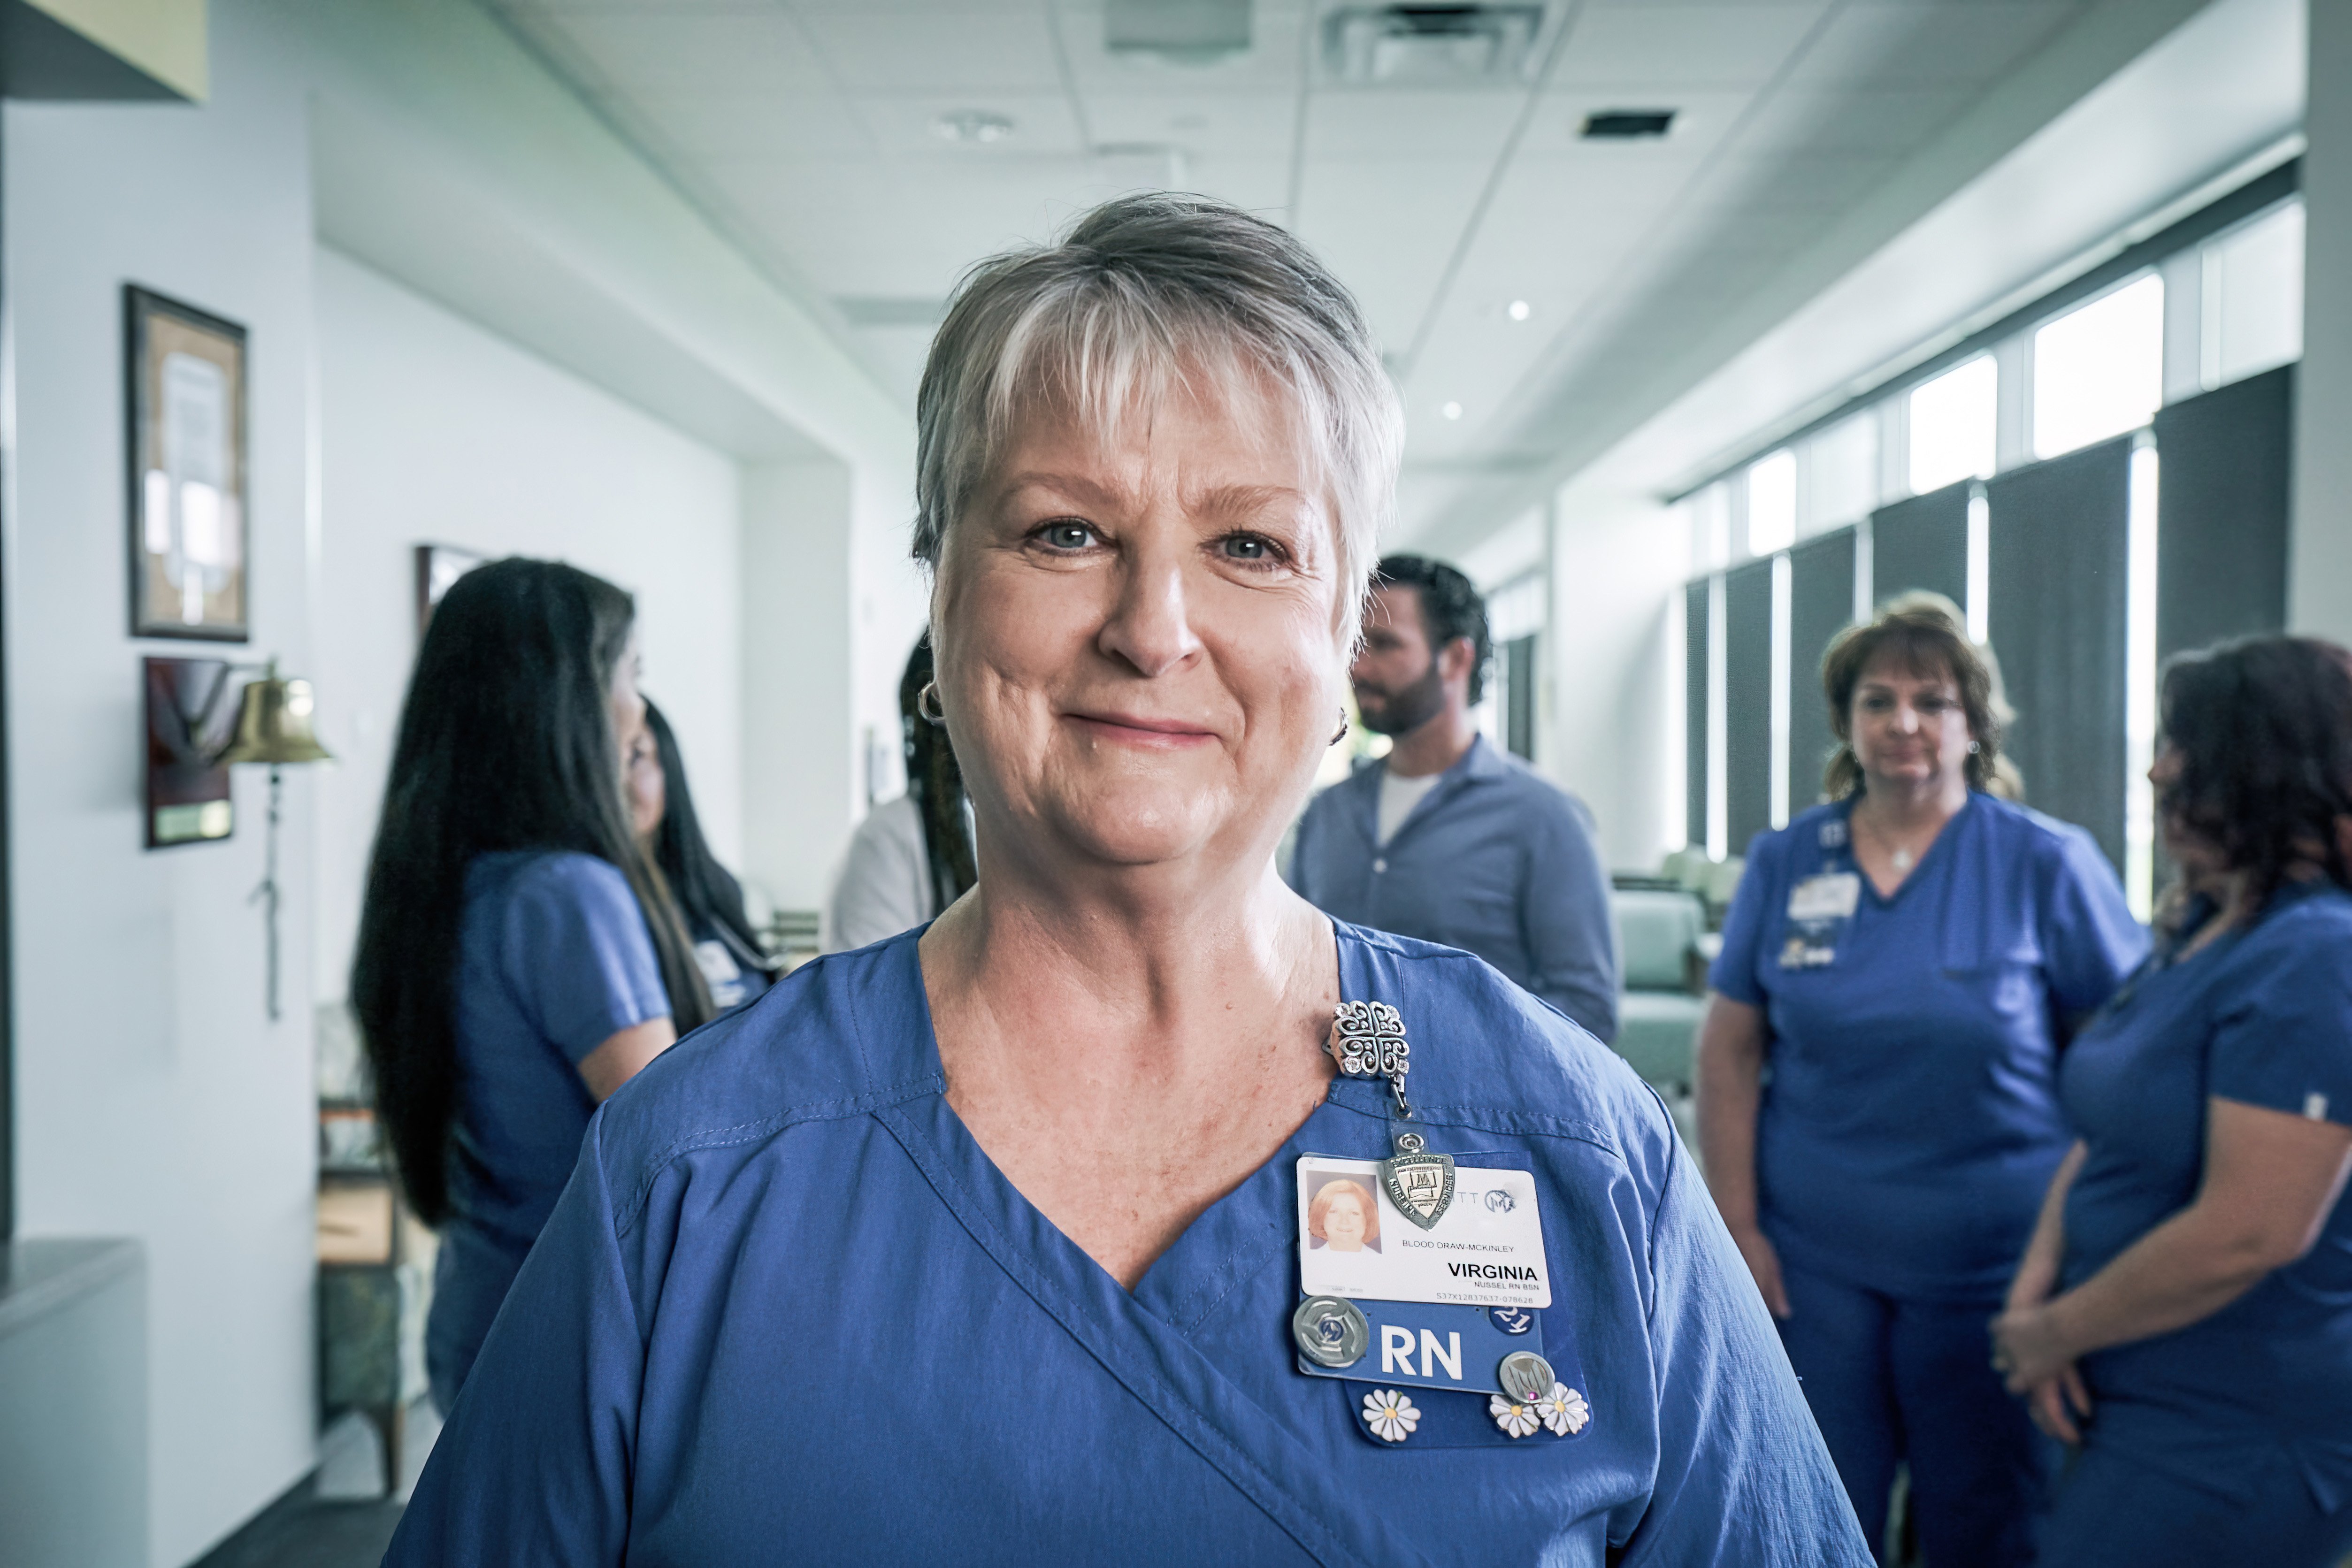 Oncology nurse at Moffitt Cancer Center smiling for the camera with a team of nurses behind her.